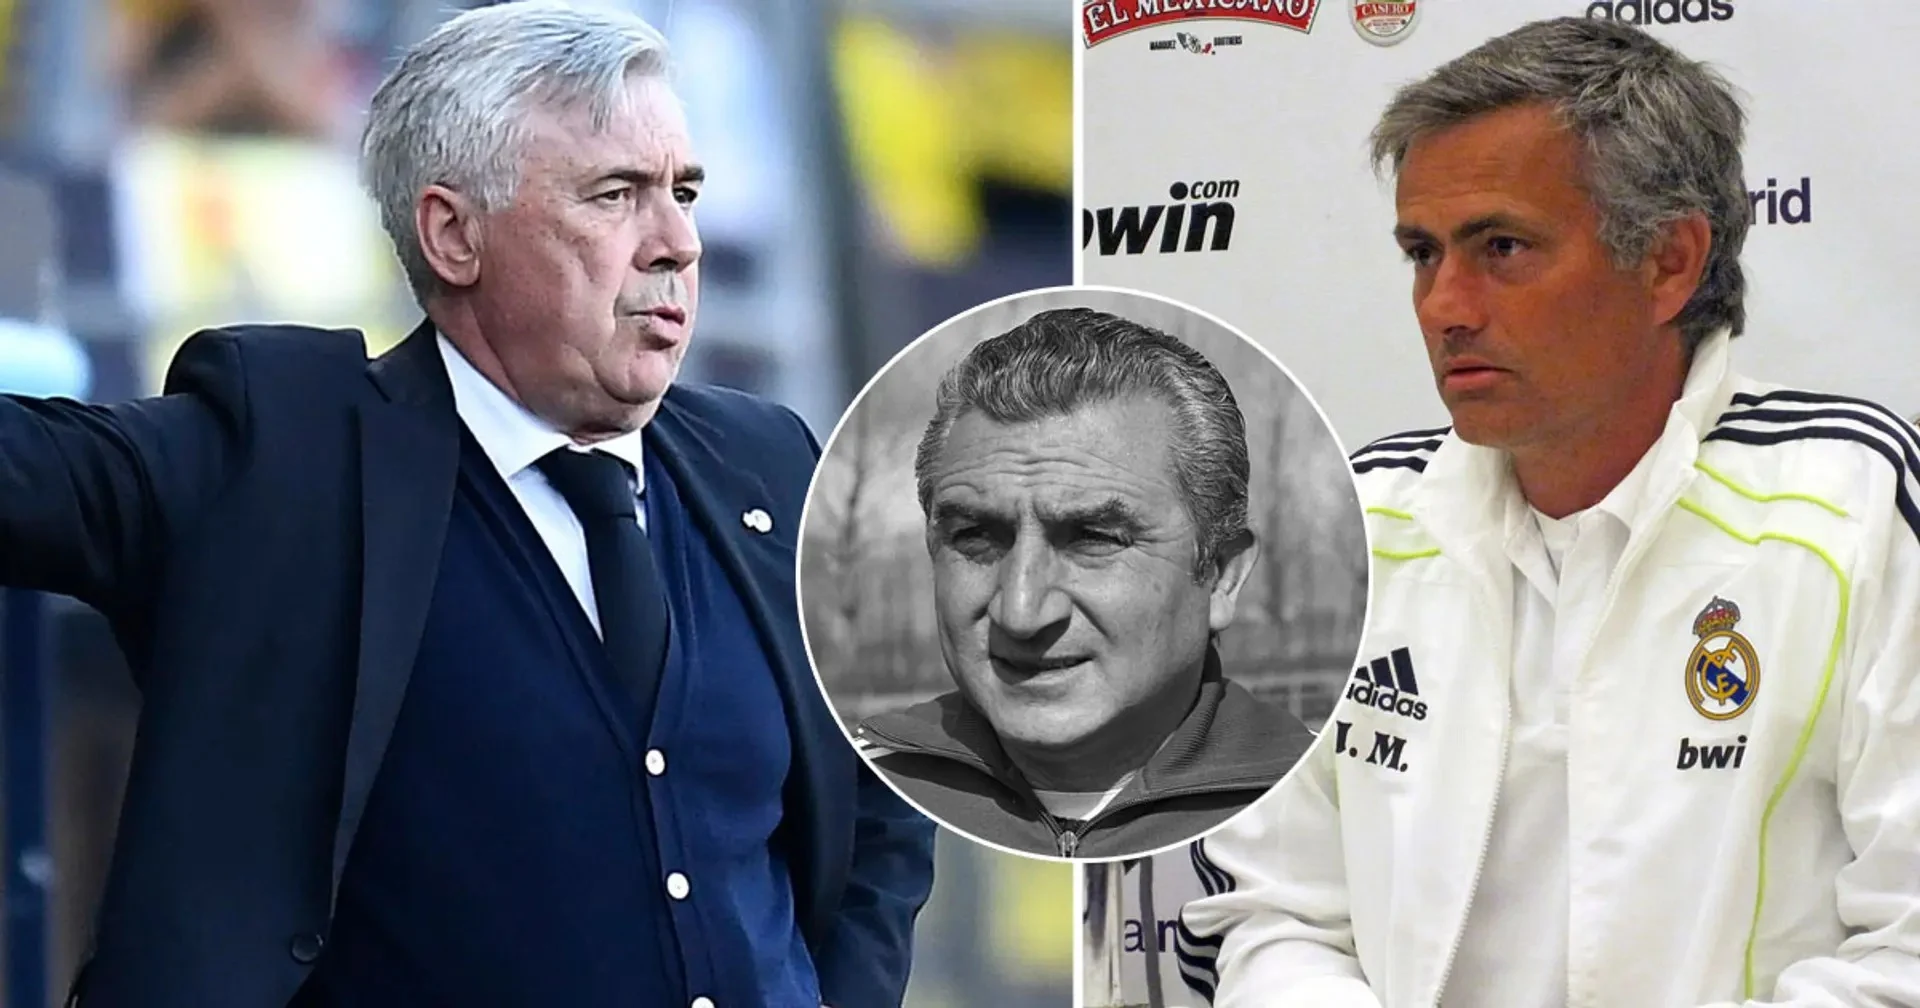 Ancelotti equals Mourinho, becomes coach with 6th most games for Madrid - breaking down his record